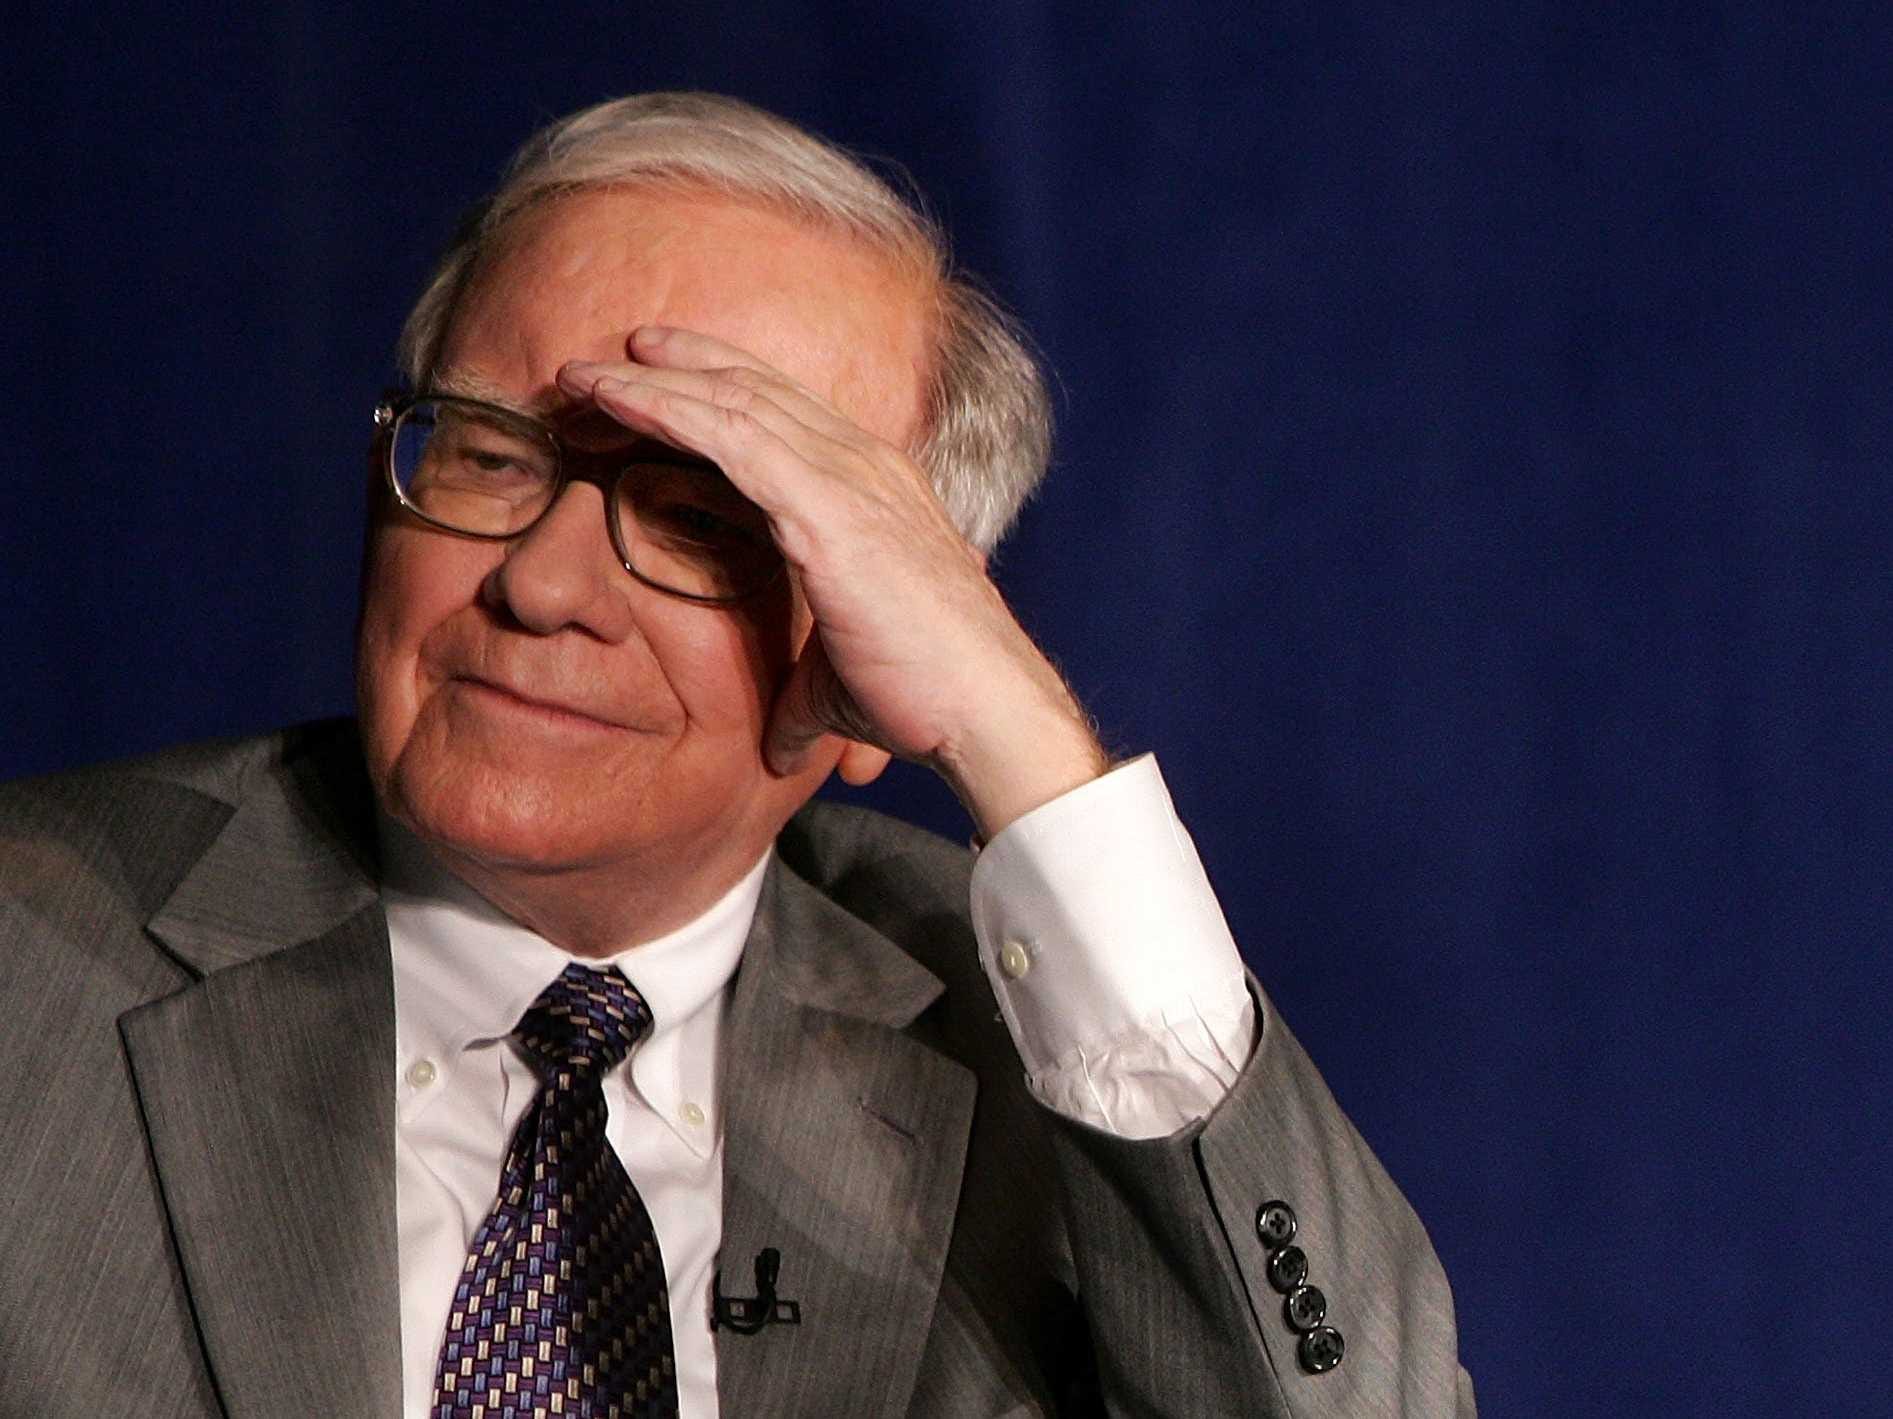 <p>Despite his multibillionaire status, Buffett has long lived a relatively <a href="https://www.businessinsider.com/warren-buffett-relatable-moments-billionaire-sun-valley-2023-7">modest and frugal lifestyle</a>. He previously <a href="https://www.cnbc.com/id/49787452" rel="noopener">told</a> CNBC and Yahoo Finance's "Off the Cuff" that he's "never had any great desire to have multiple houses and all kinds of things and multiple cars."</p>